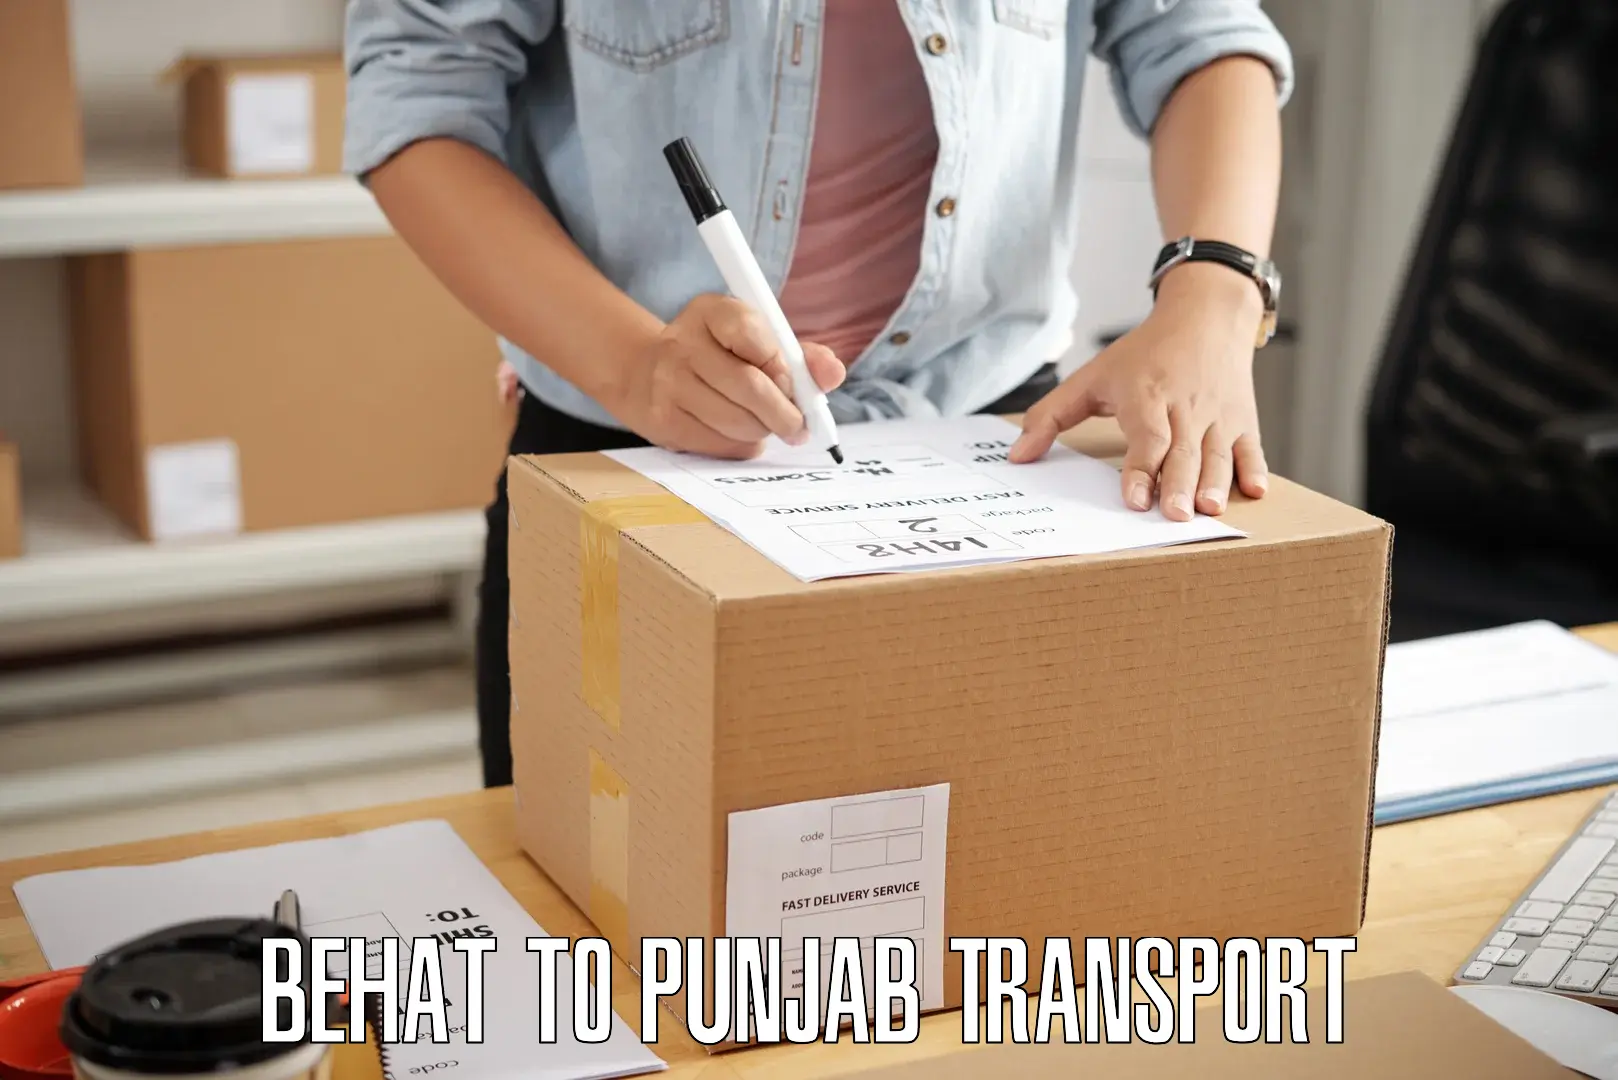 Delivery service in Behat to Punjab